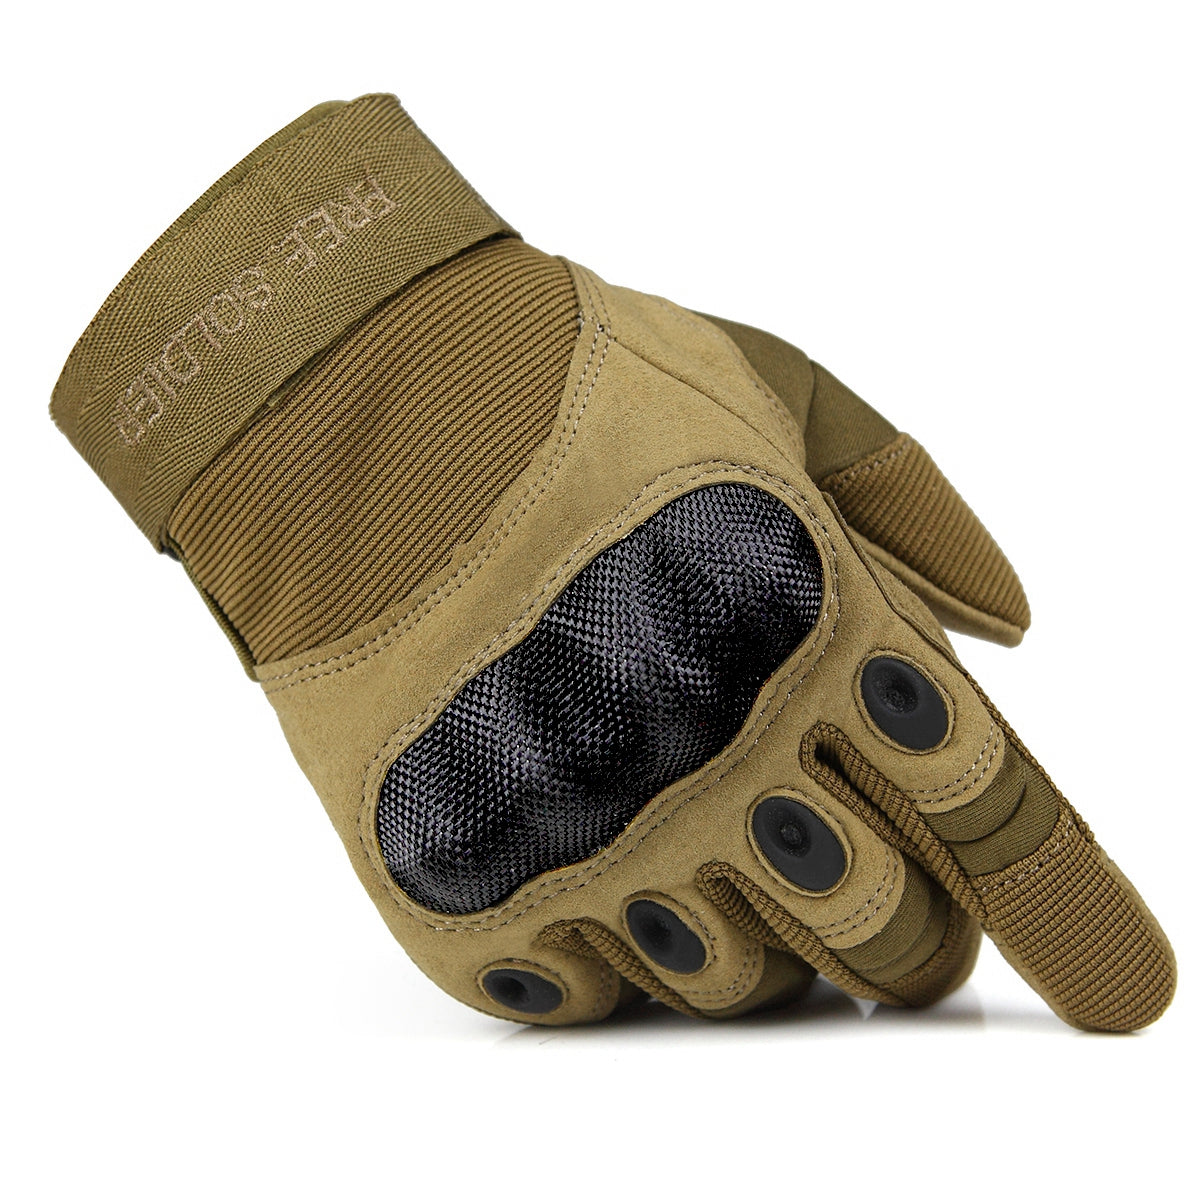 Outdoor Full Finger Safety Cycling Gloves - FreeSoldier